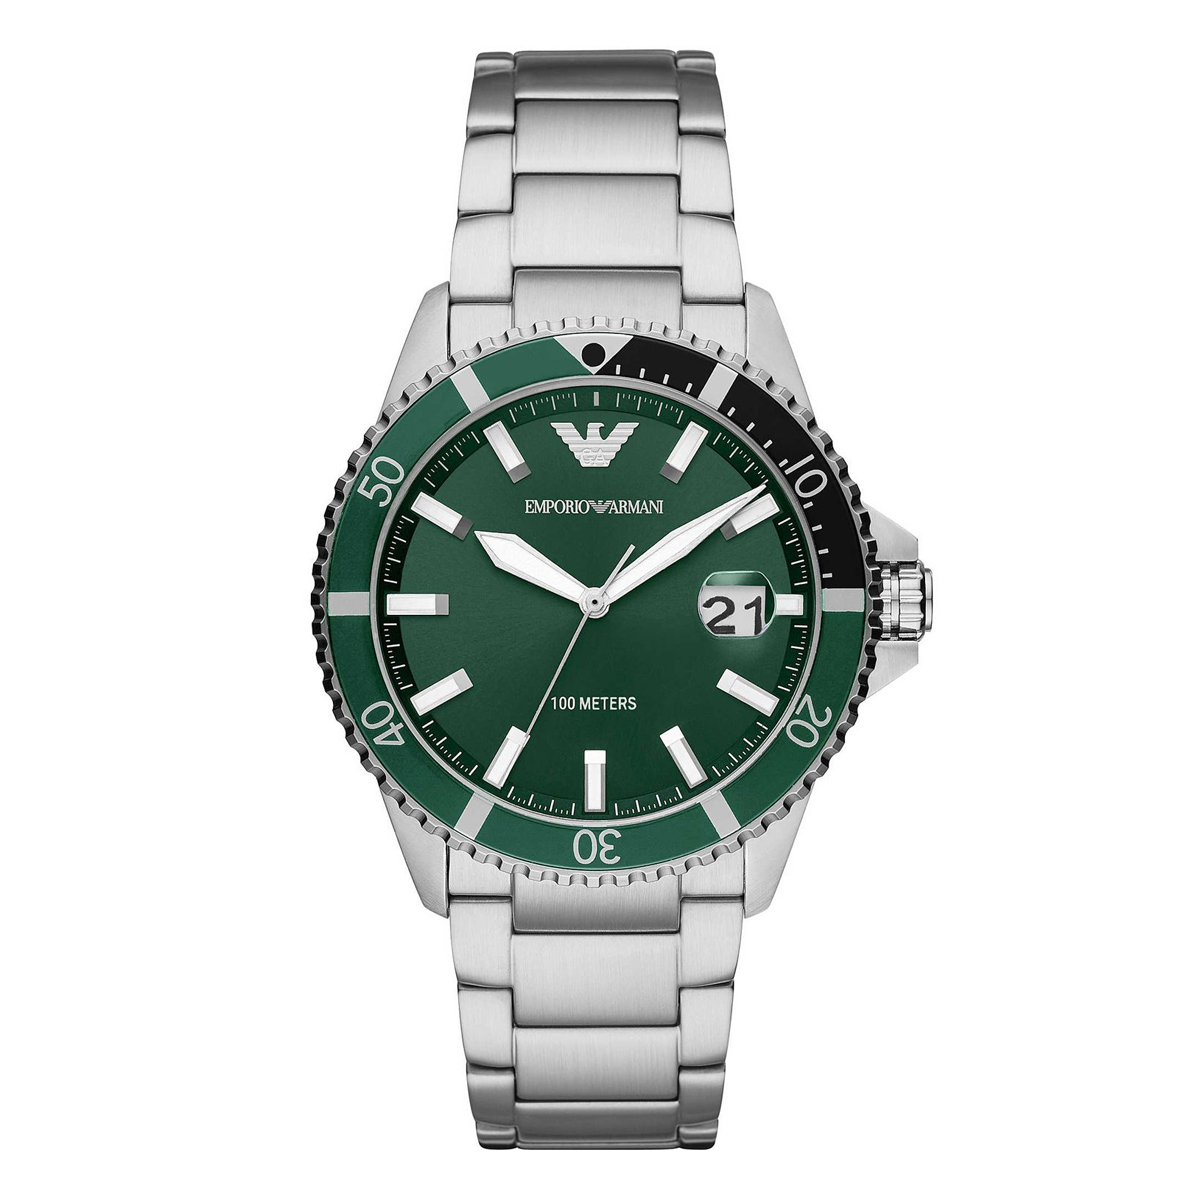 Emporio Armani Stainless Steel Watch - Green Dial